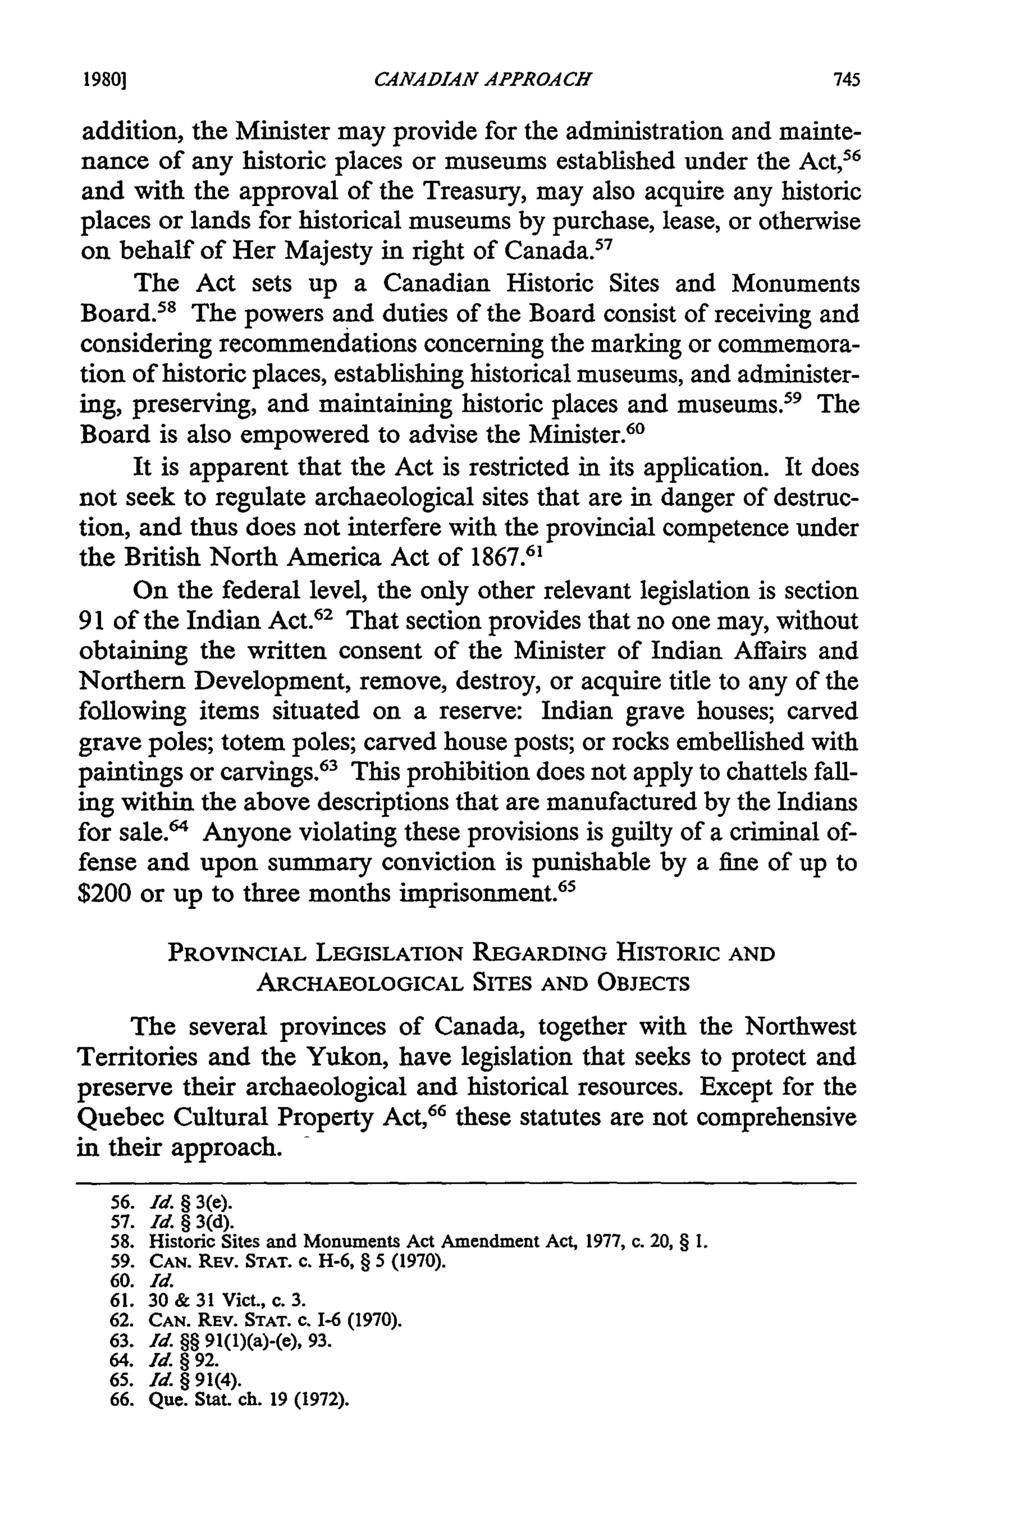 1980] CANADIAN APPROACH addition, the Minister may provide for the administration and maintenance of any historic places or museums established under the Act, 6 and with the approval of the Treasury,